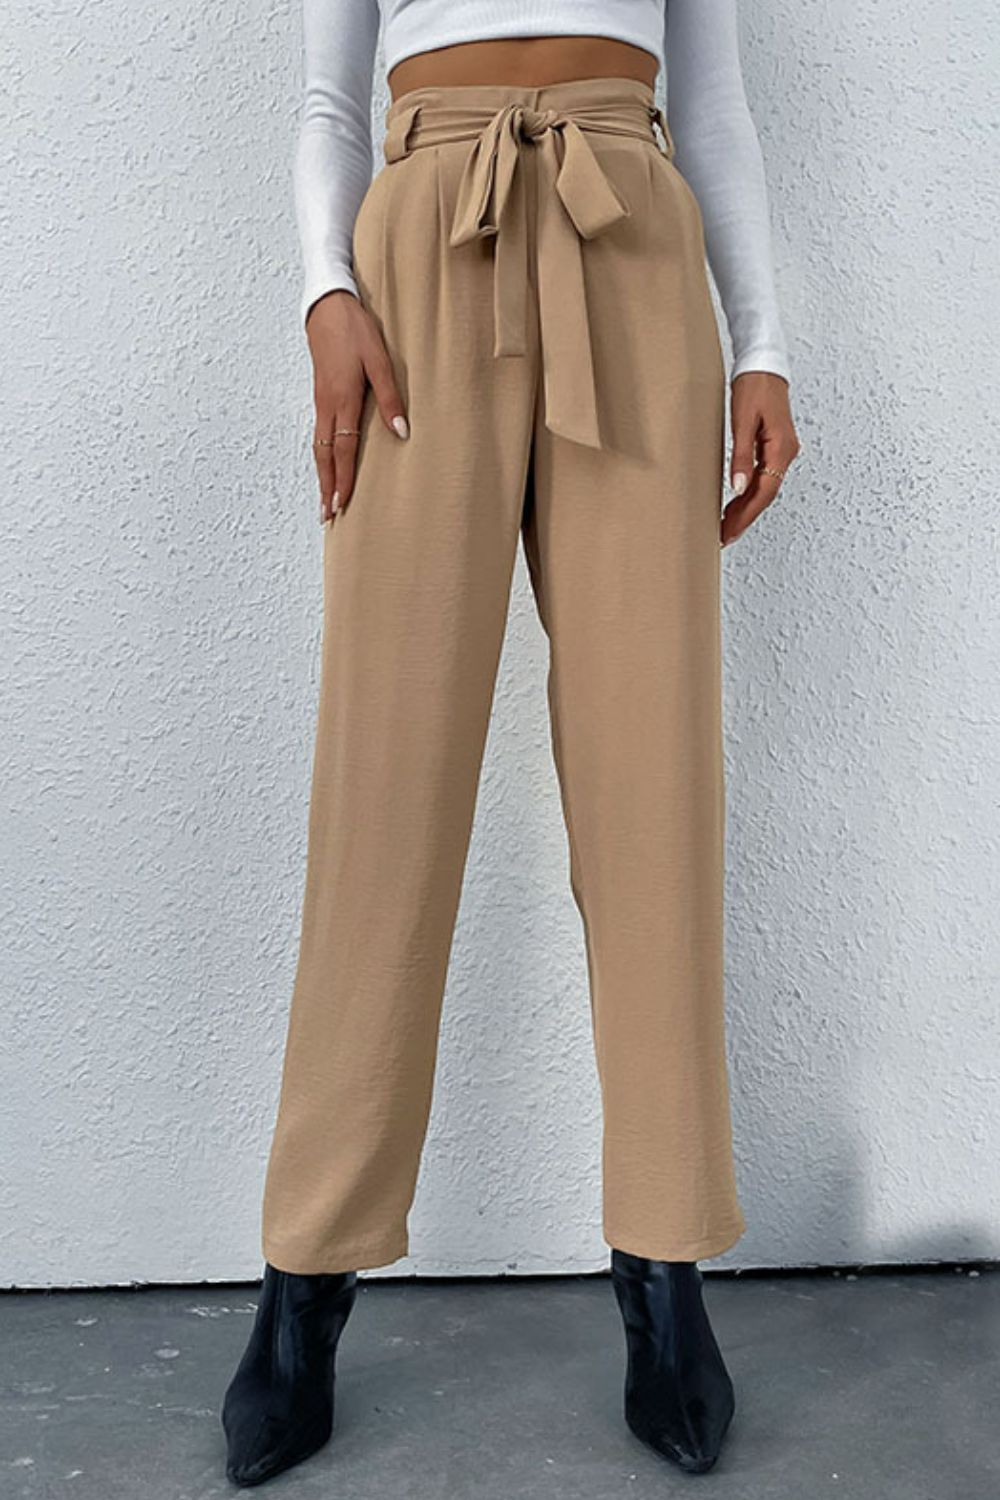 Belted Straight Leg Pants with Pockets - Girl Code